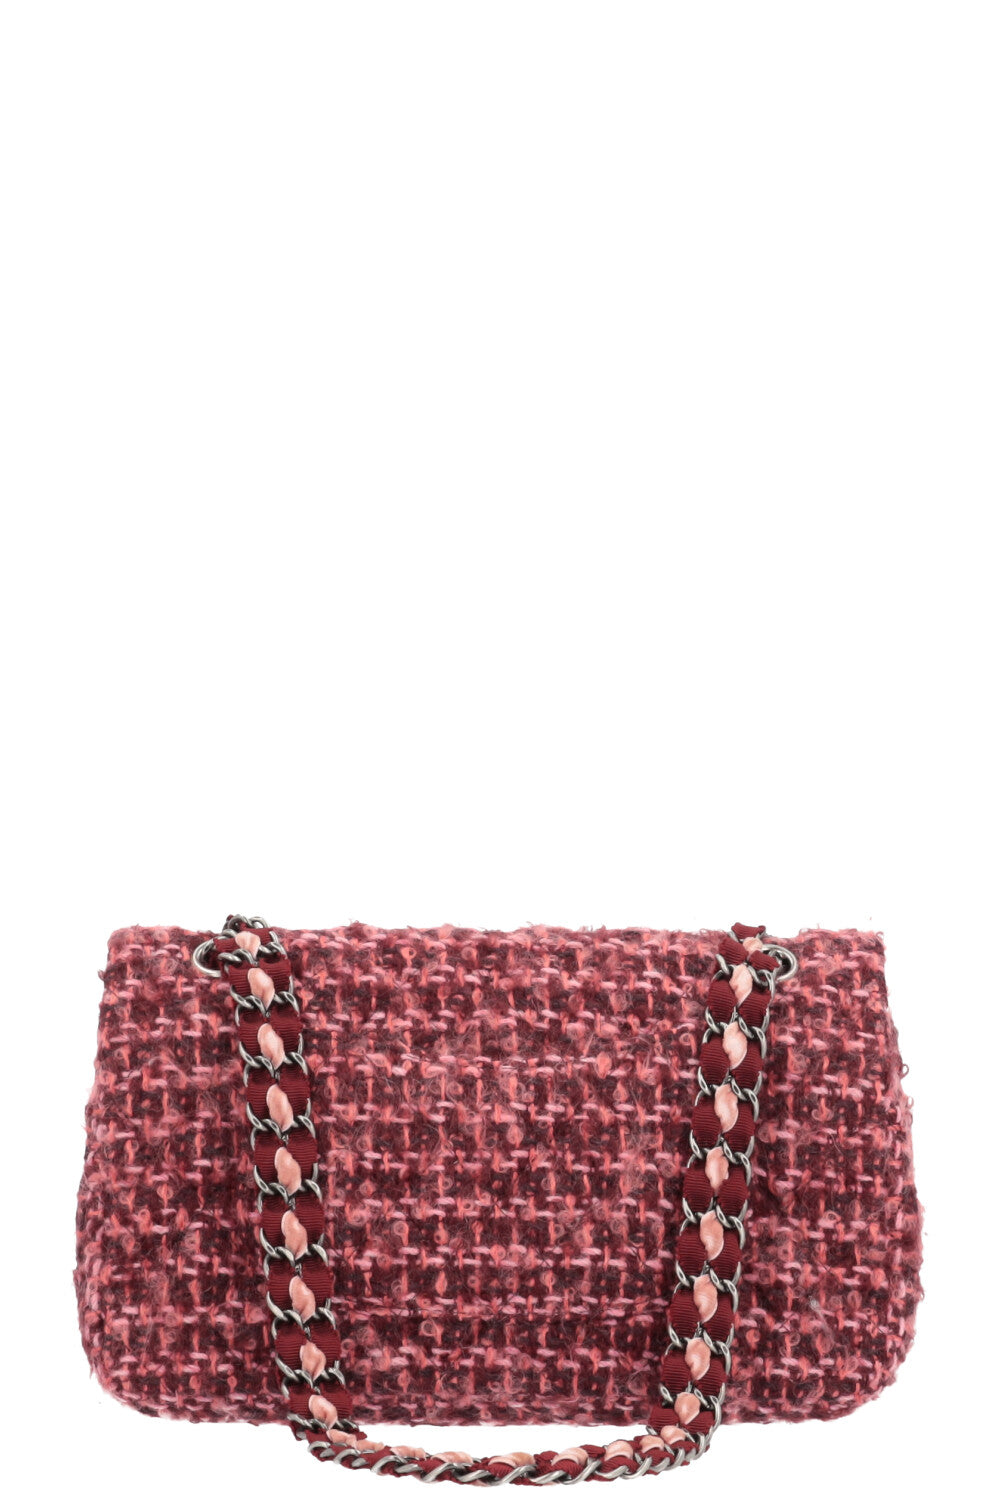 Chanel Red Tweed Double Flap Bag – SFN